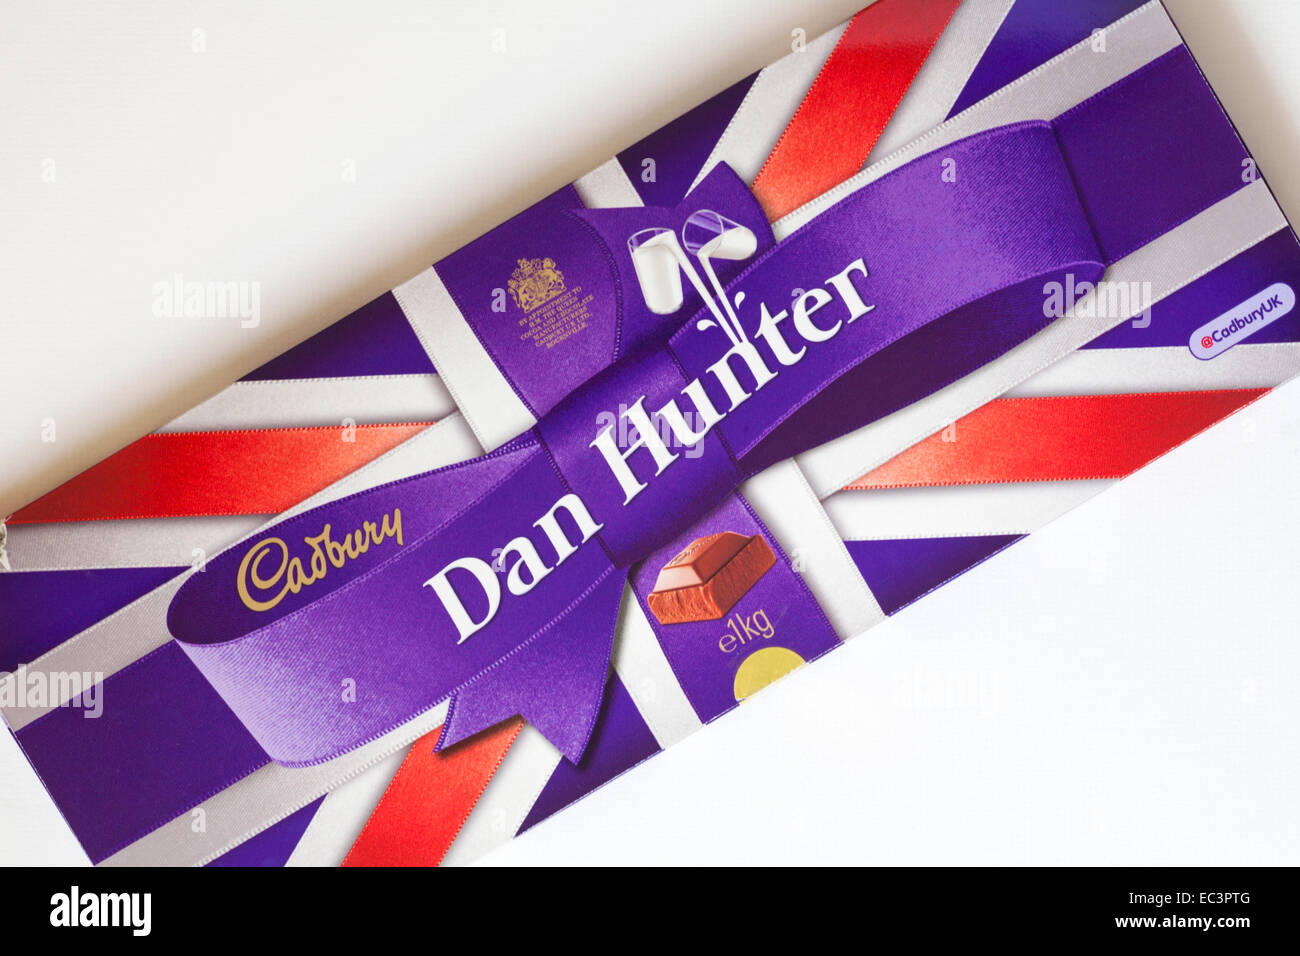 Bar of 1kg Cadbury personalised chocolate bar for Dan Hunter to commemorate the Olympics on white background Stock Photo